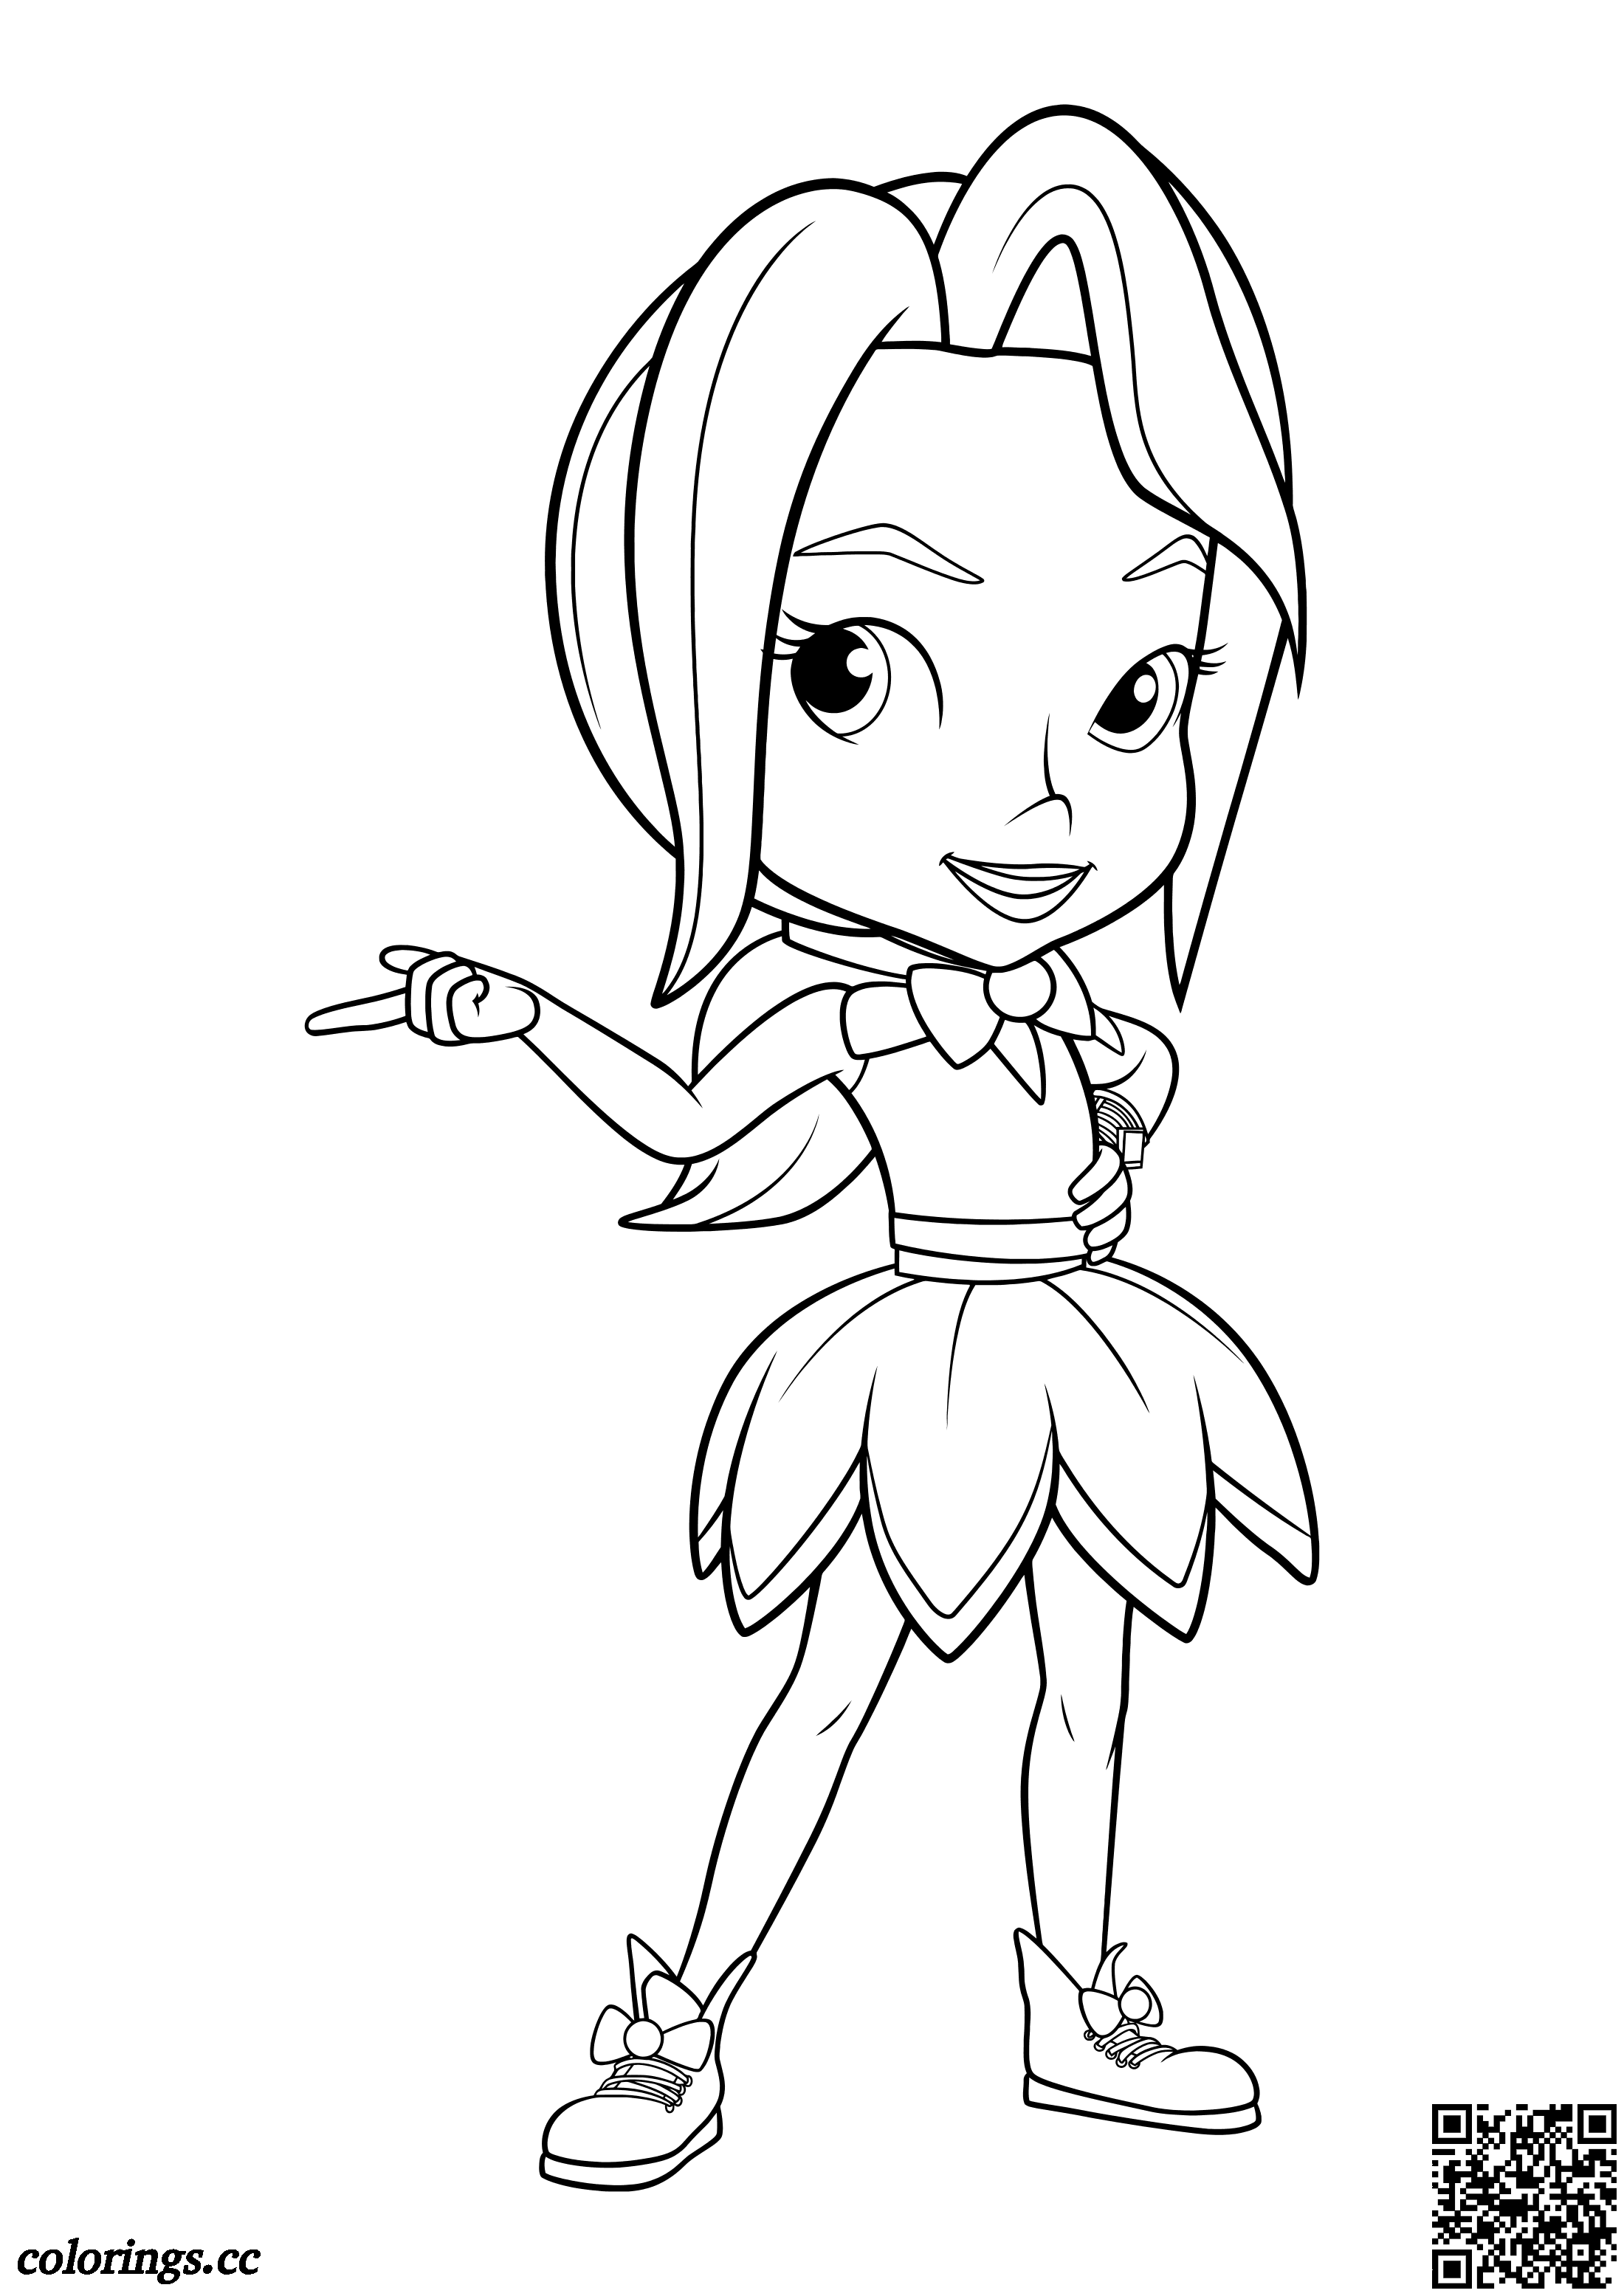 Indigo Allfruit coloring pages, Rainbow Rangers coloring pages ...